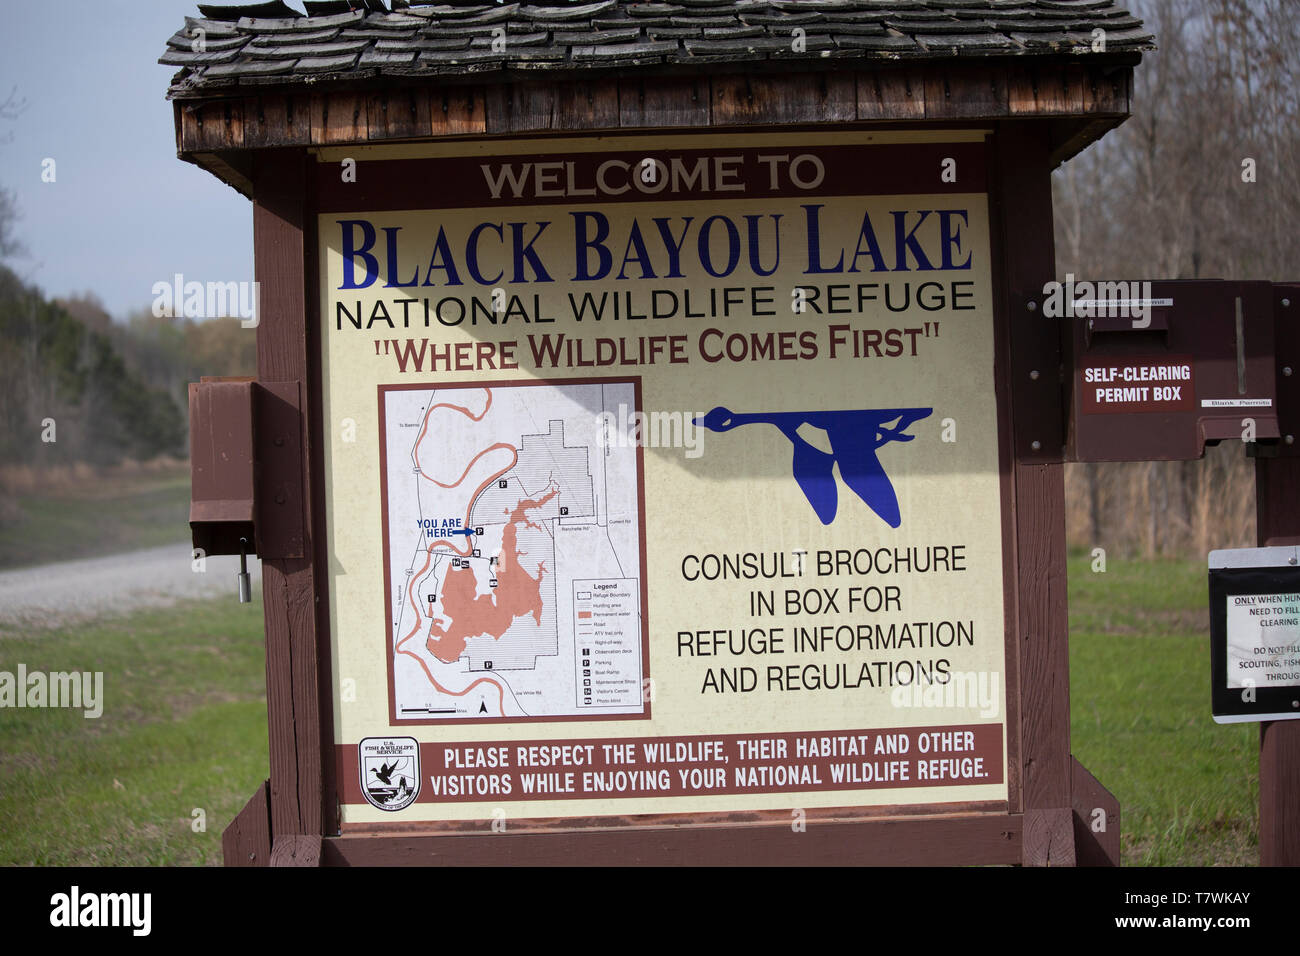 MONROE, LOUISIANA/USA - MARCH 16, 2018: Entry sign to the hunting area of the Black Bayou Lake National Wildlife Refuge on March 16, 2018 in Monroe, L Stock Photo